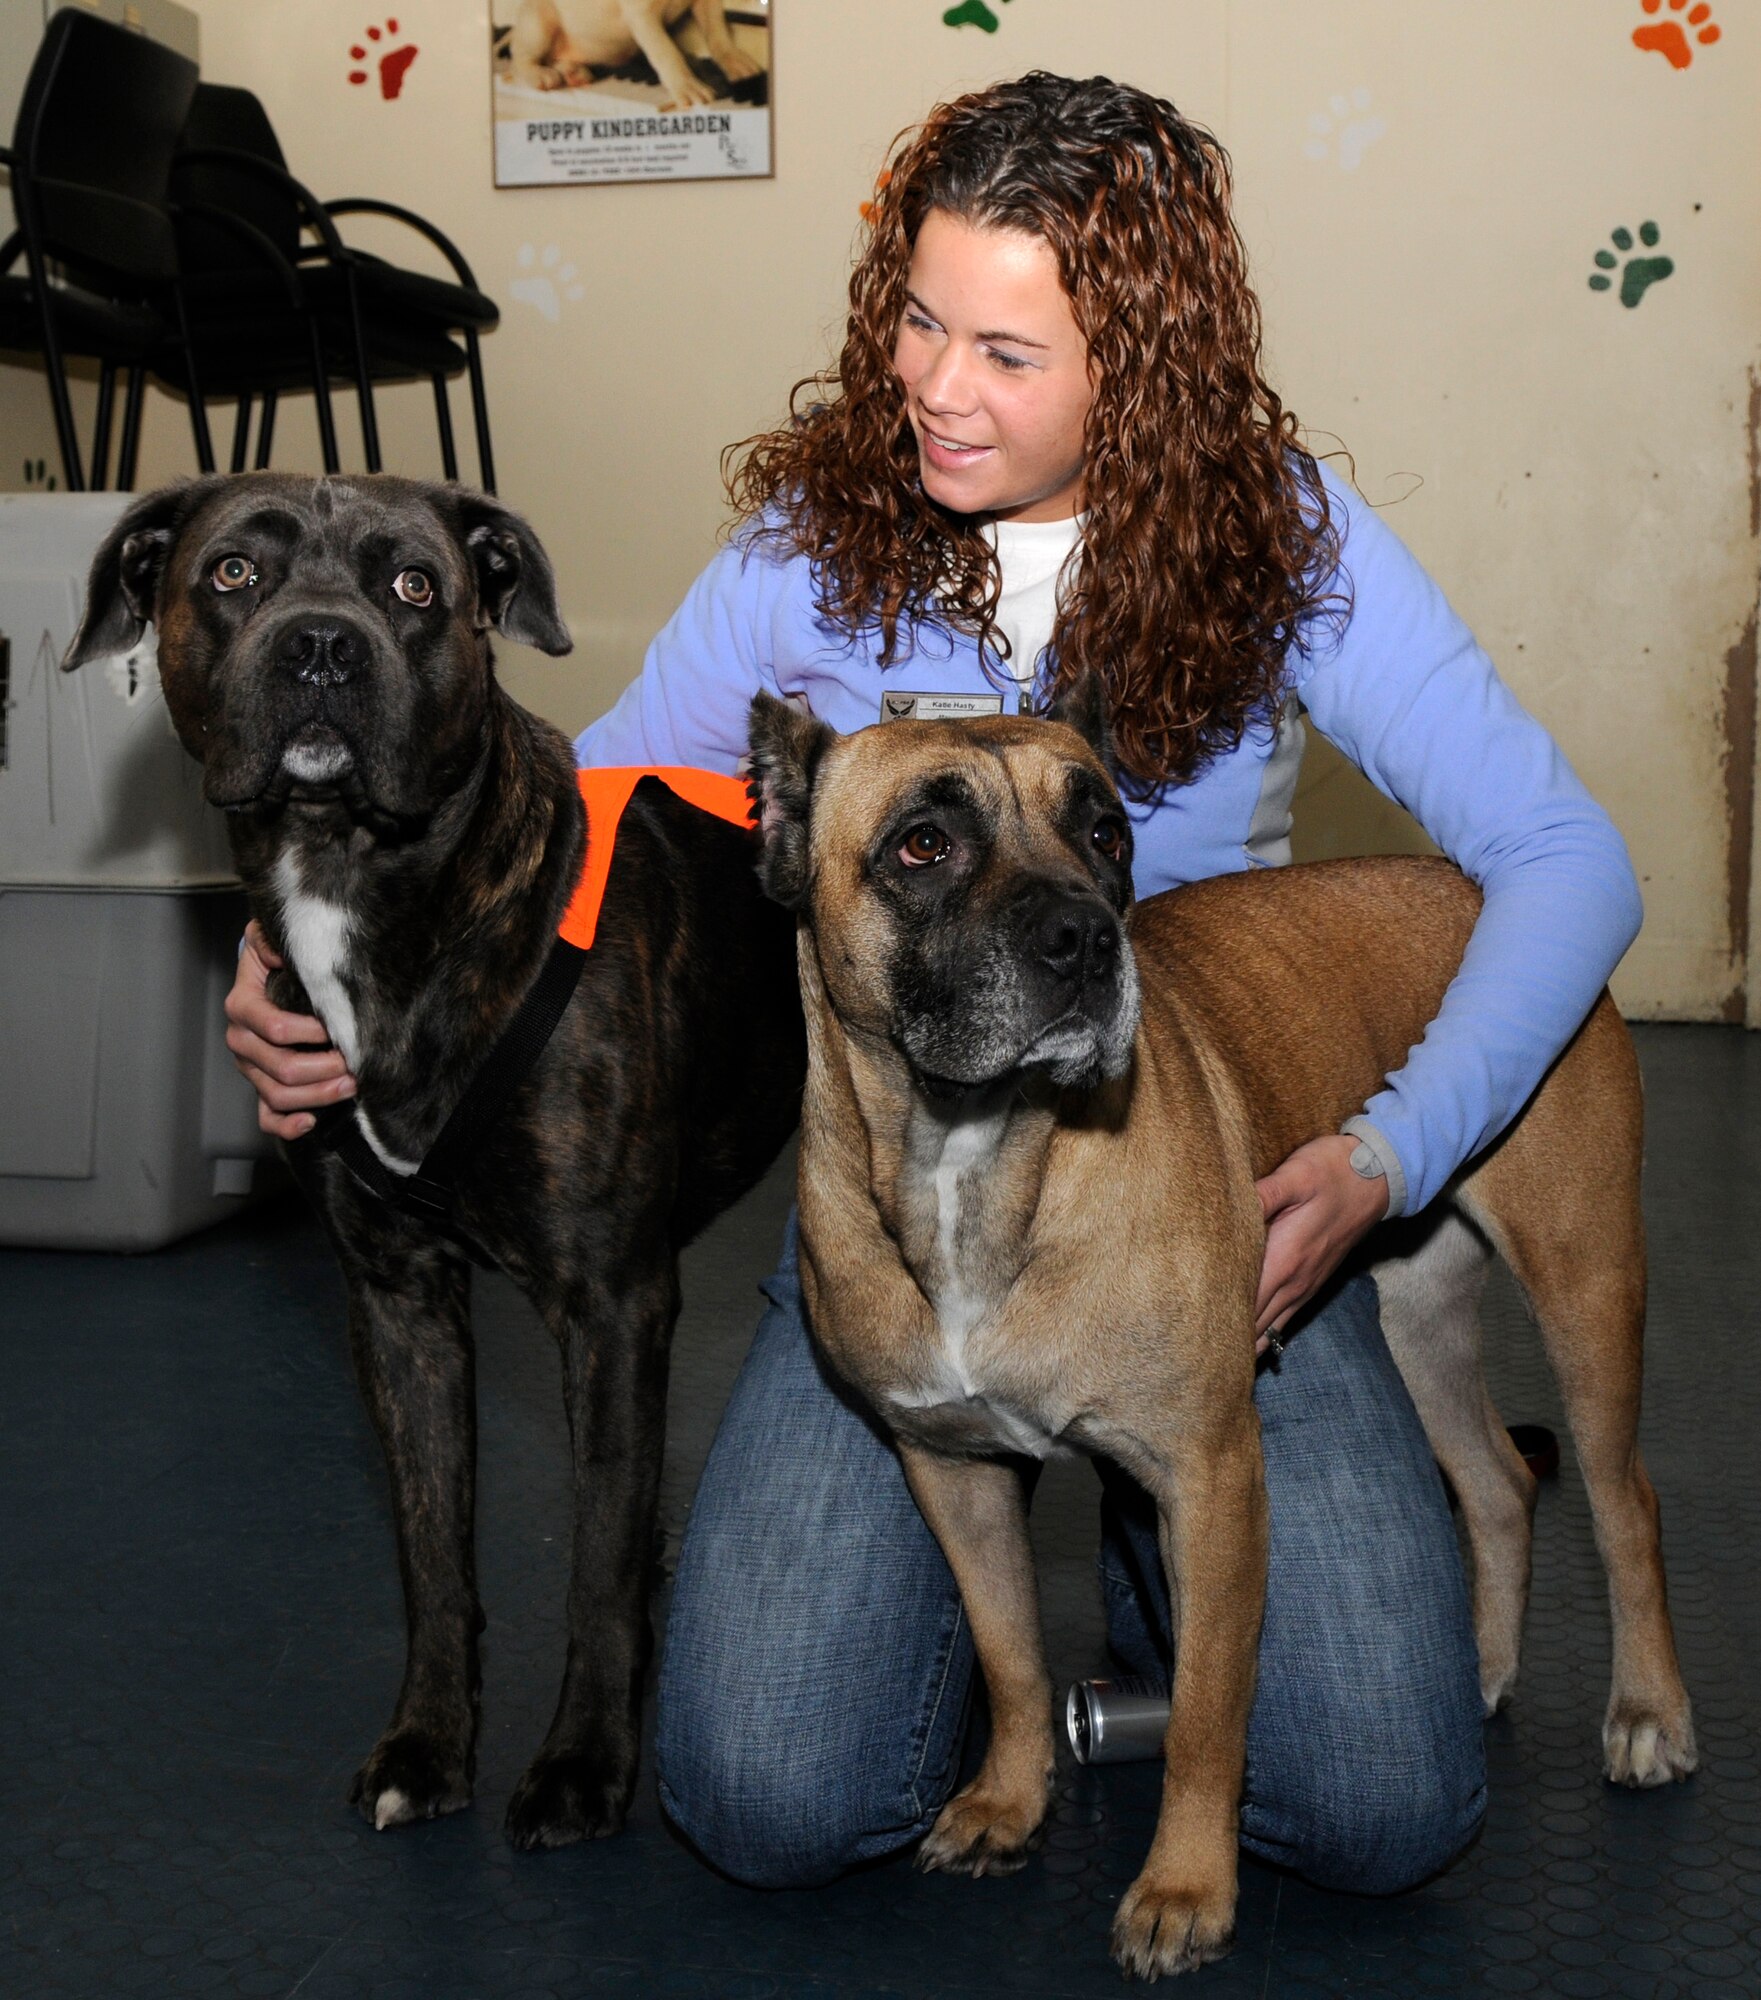 SPANGDAHLEM AIR BASE, Germany – Katie Hasty, Pet Spa representative, plays with Mufasa and Fidel, Blue Italian Mastiffs, during Doggy Day Care Nov. 16 at the Pet Spa. Doggy Day Care gives Sabers a place to kennel their pets during the work day. (U.S. Air Force photo/Airman 1st Class Staci Miller)